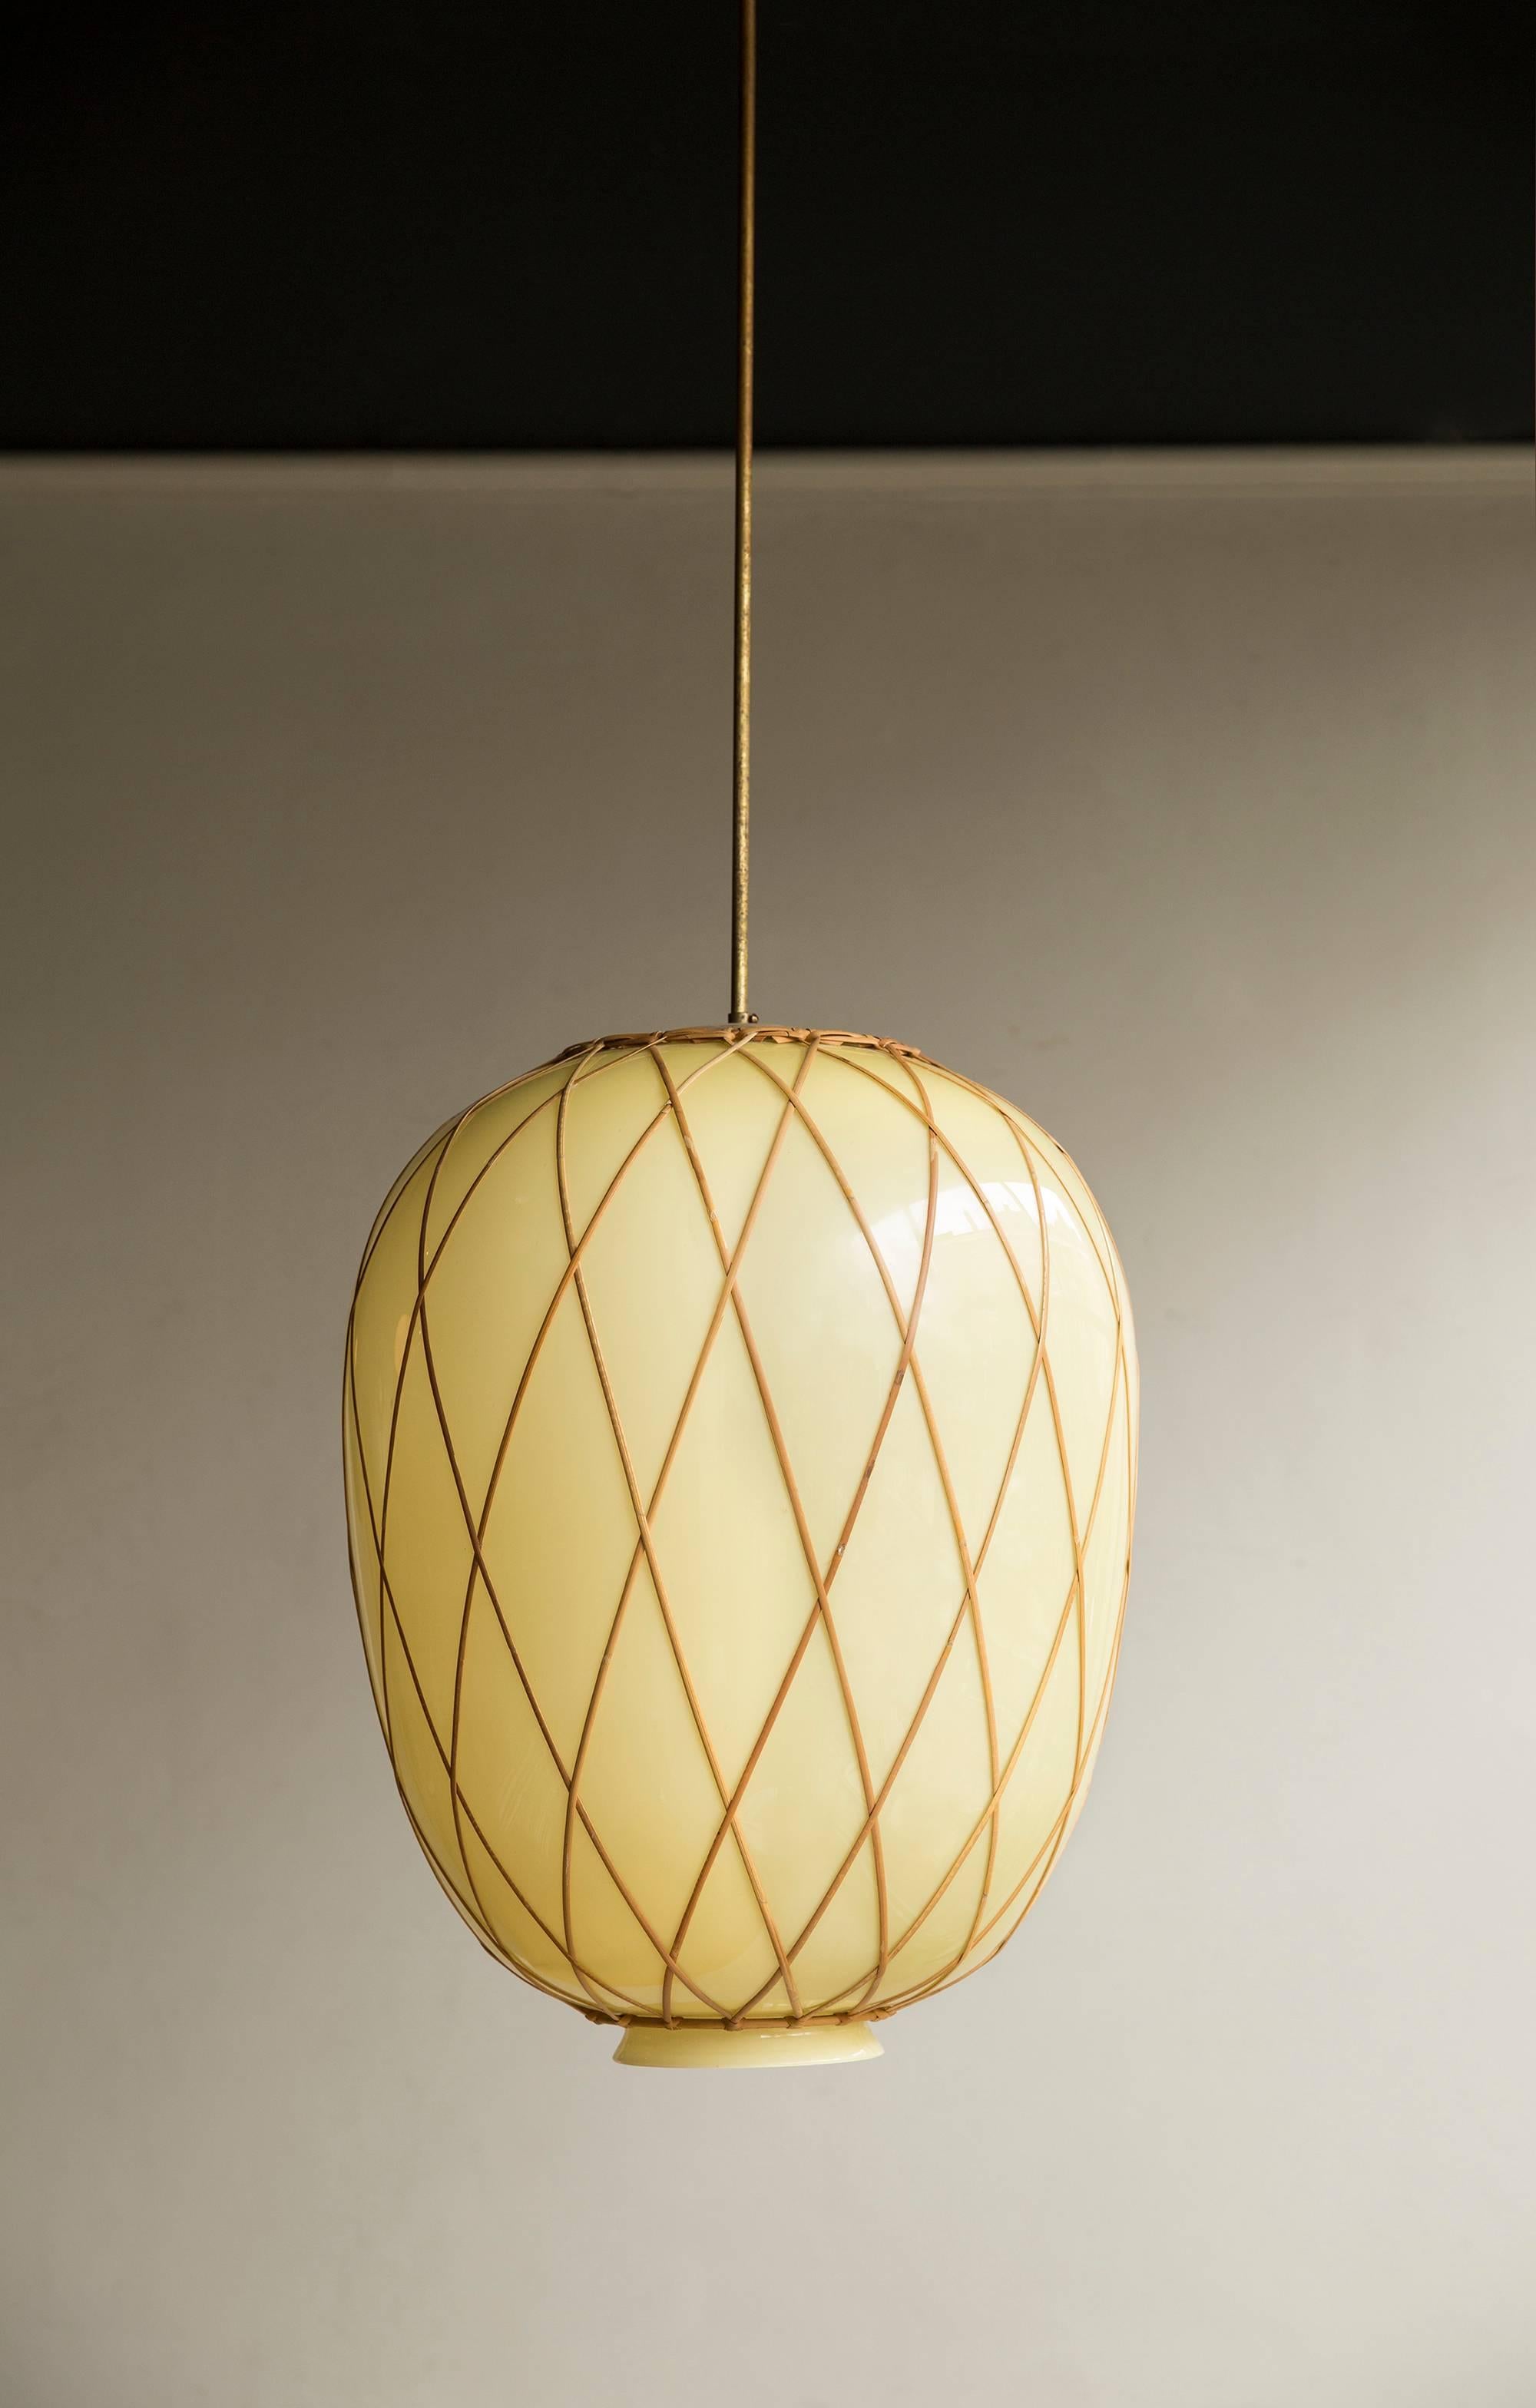 A particularly large Swedish glass pendant with cane trellis wrap suspended by its original 1.5 metre gold lacquered steel rod, designed by Carl Westman for the Norrköpings Lasarett, circa 1927.

Carl Westman worked primarily as an architect and